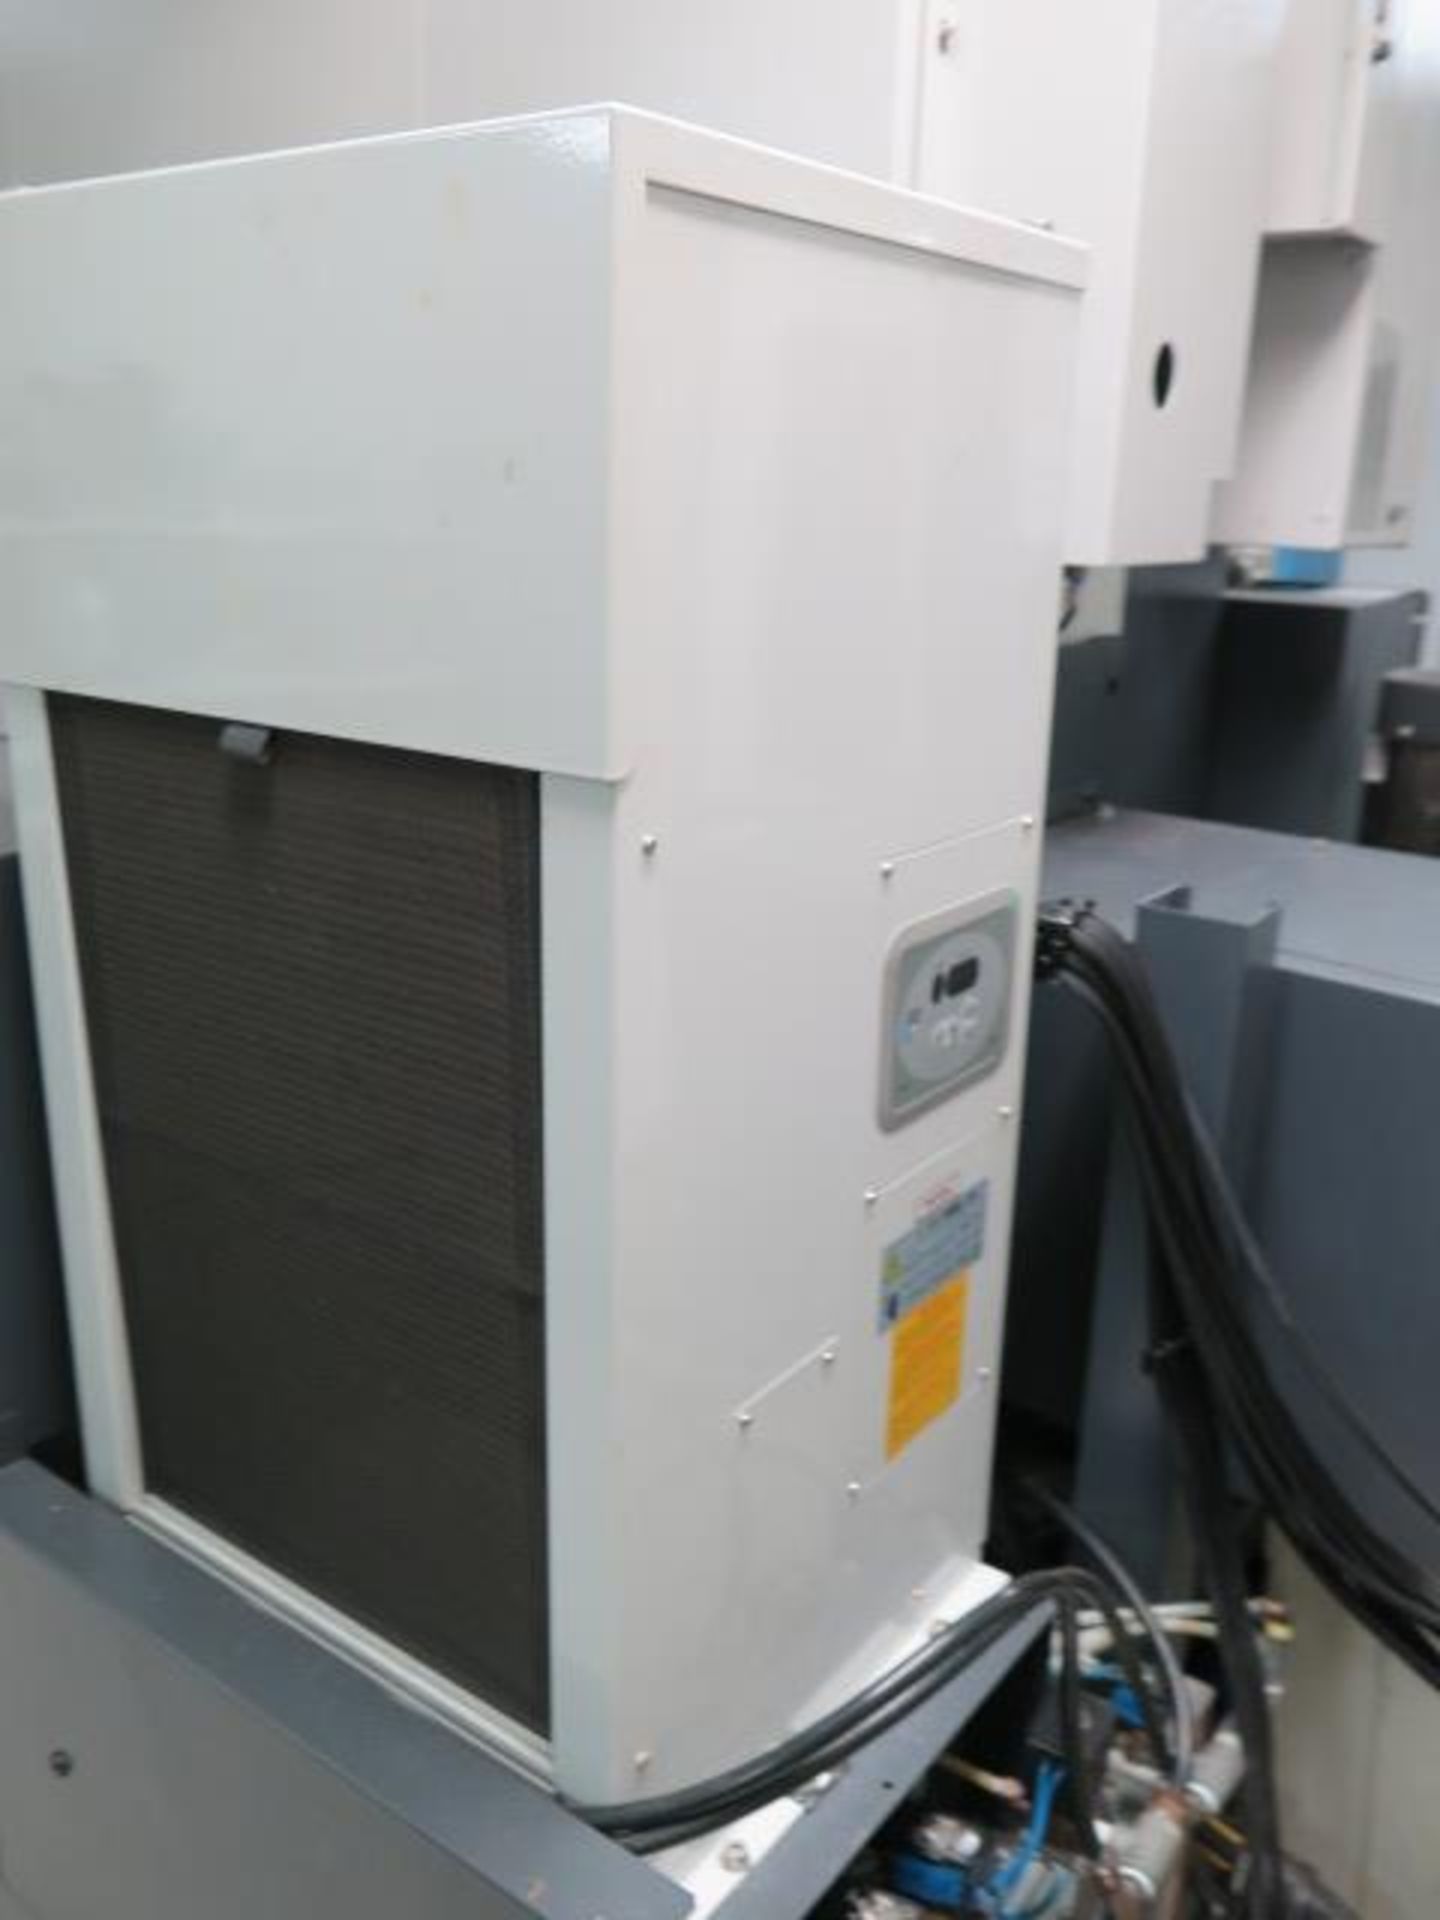 2013 Mitsubishi MD+ PRO III mdl. MV1200S CNC Wire EDM s/n 53DM1687 w/ Mitsubishi M700, SOLD AS IS - Image 19 of 23